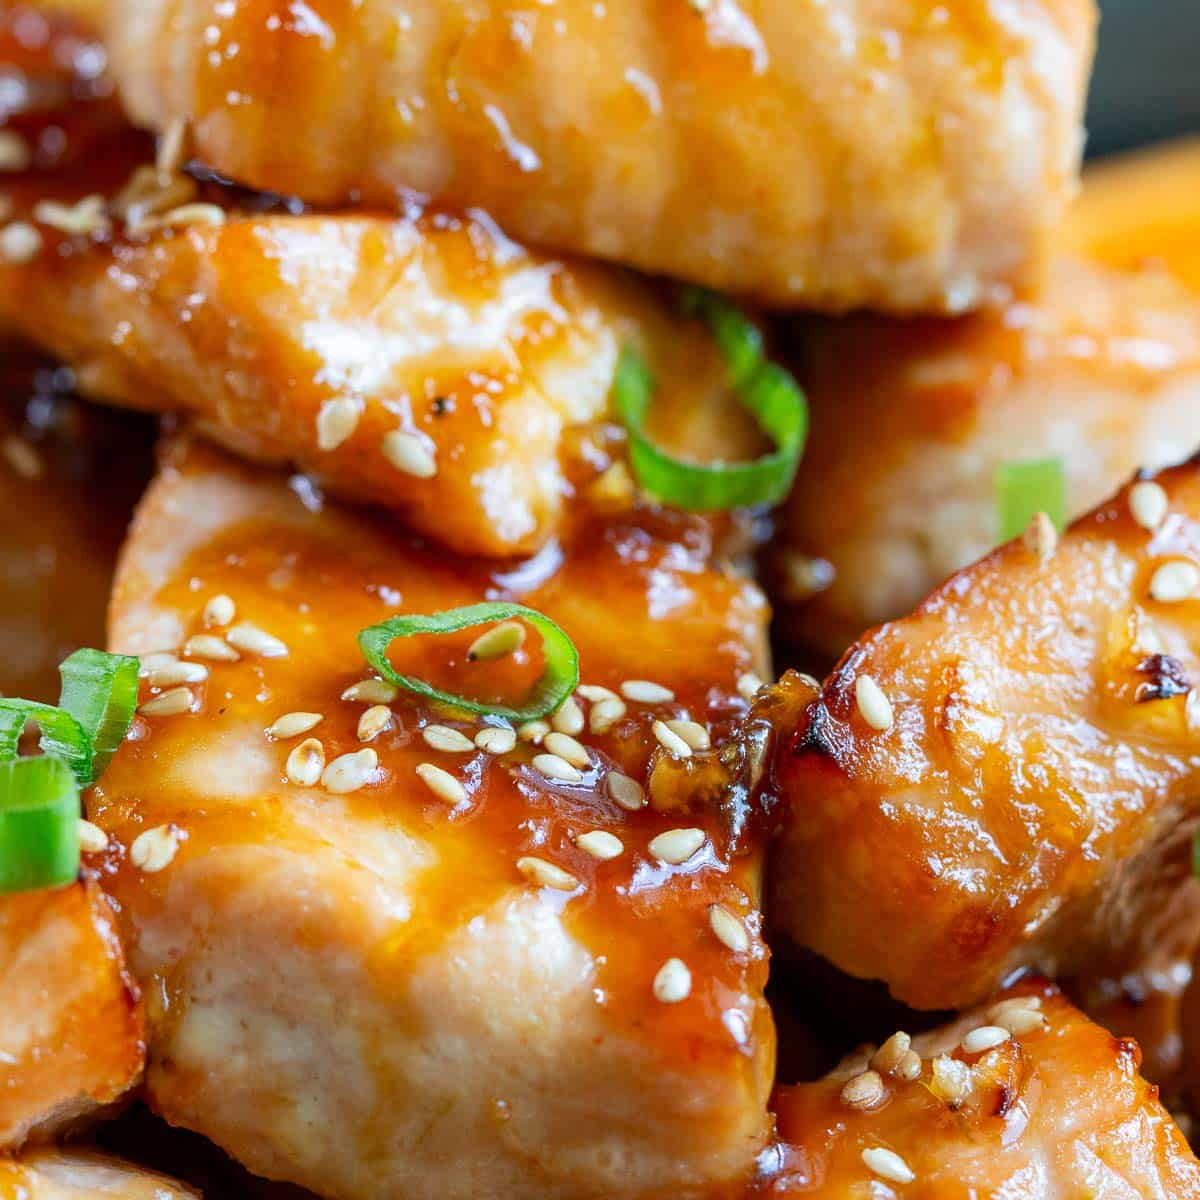 Closeup of the saucy air fryer salmon bites garnished with sesame seeds and green onion.